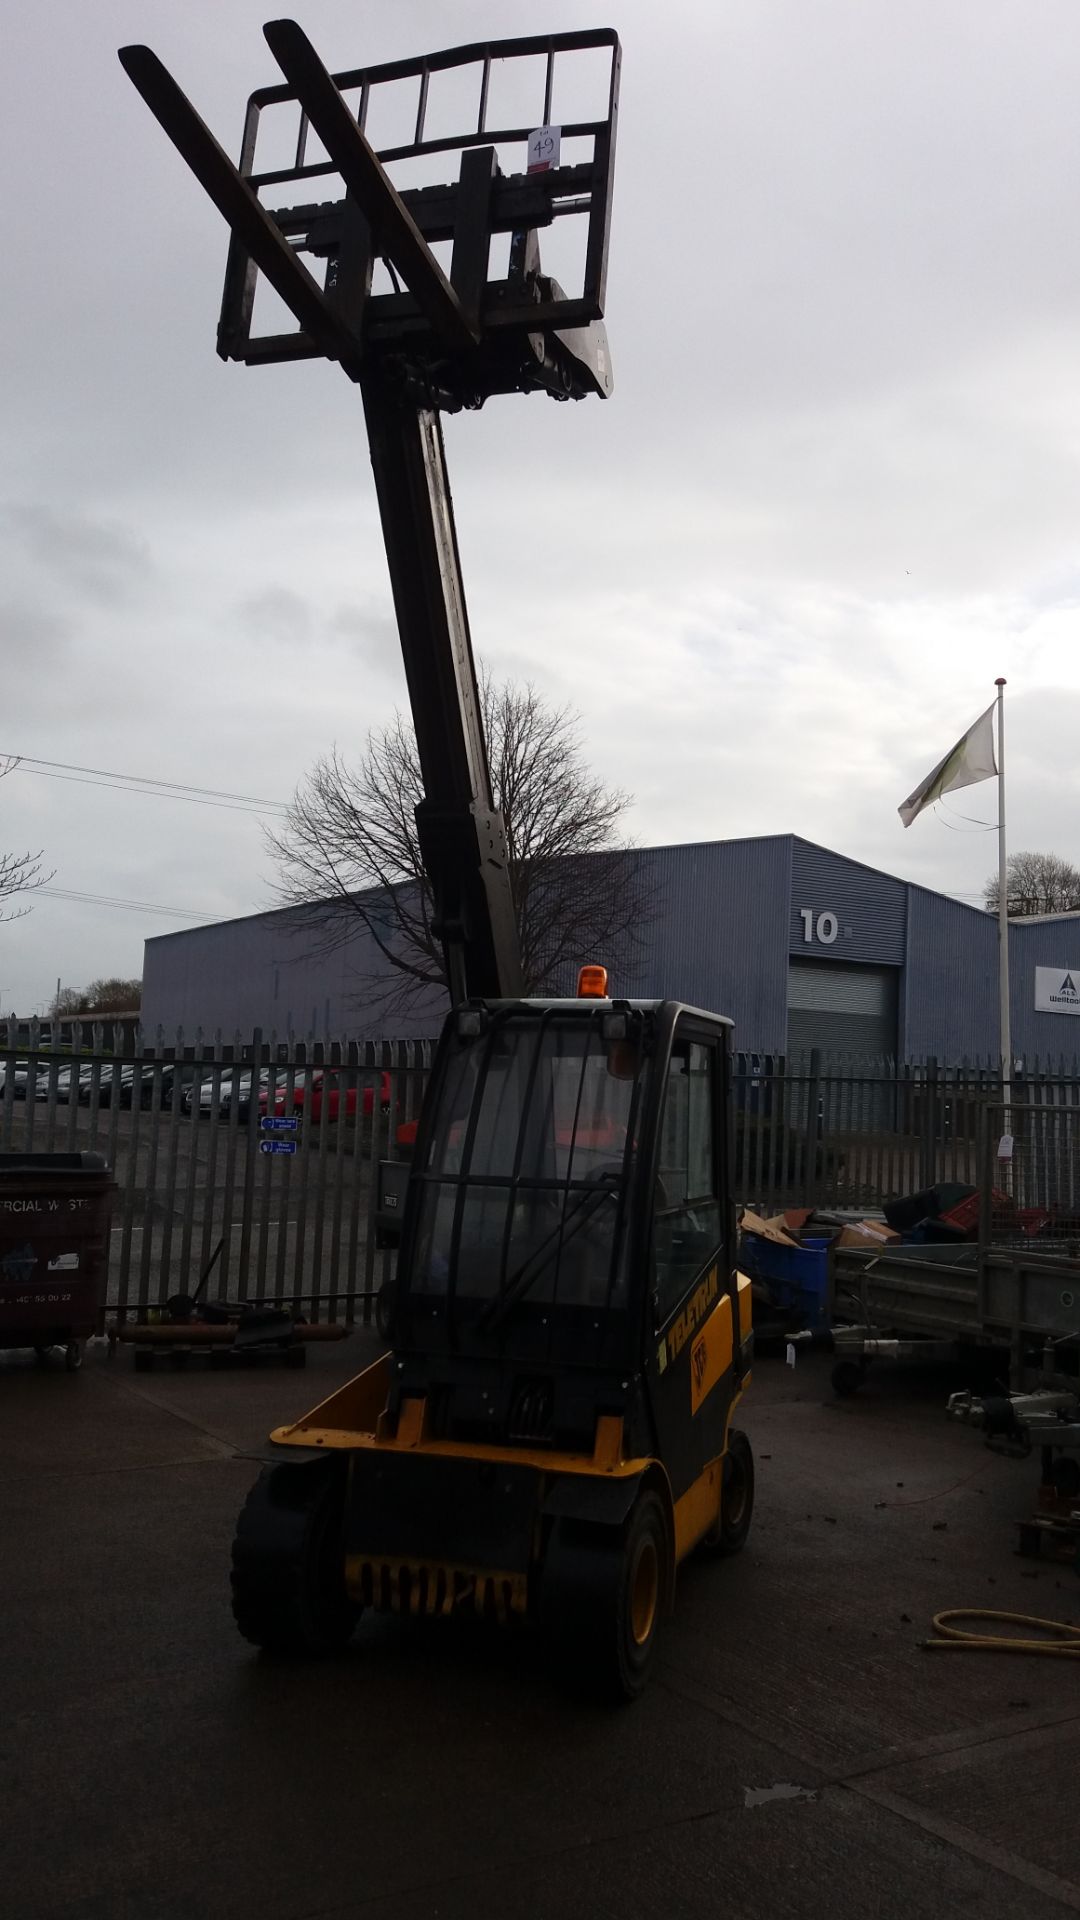 JCB TLT30 Teletruk counterbalance forklift with telescopic boom - Image 13 of 22